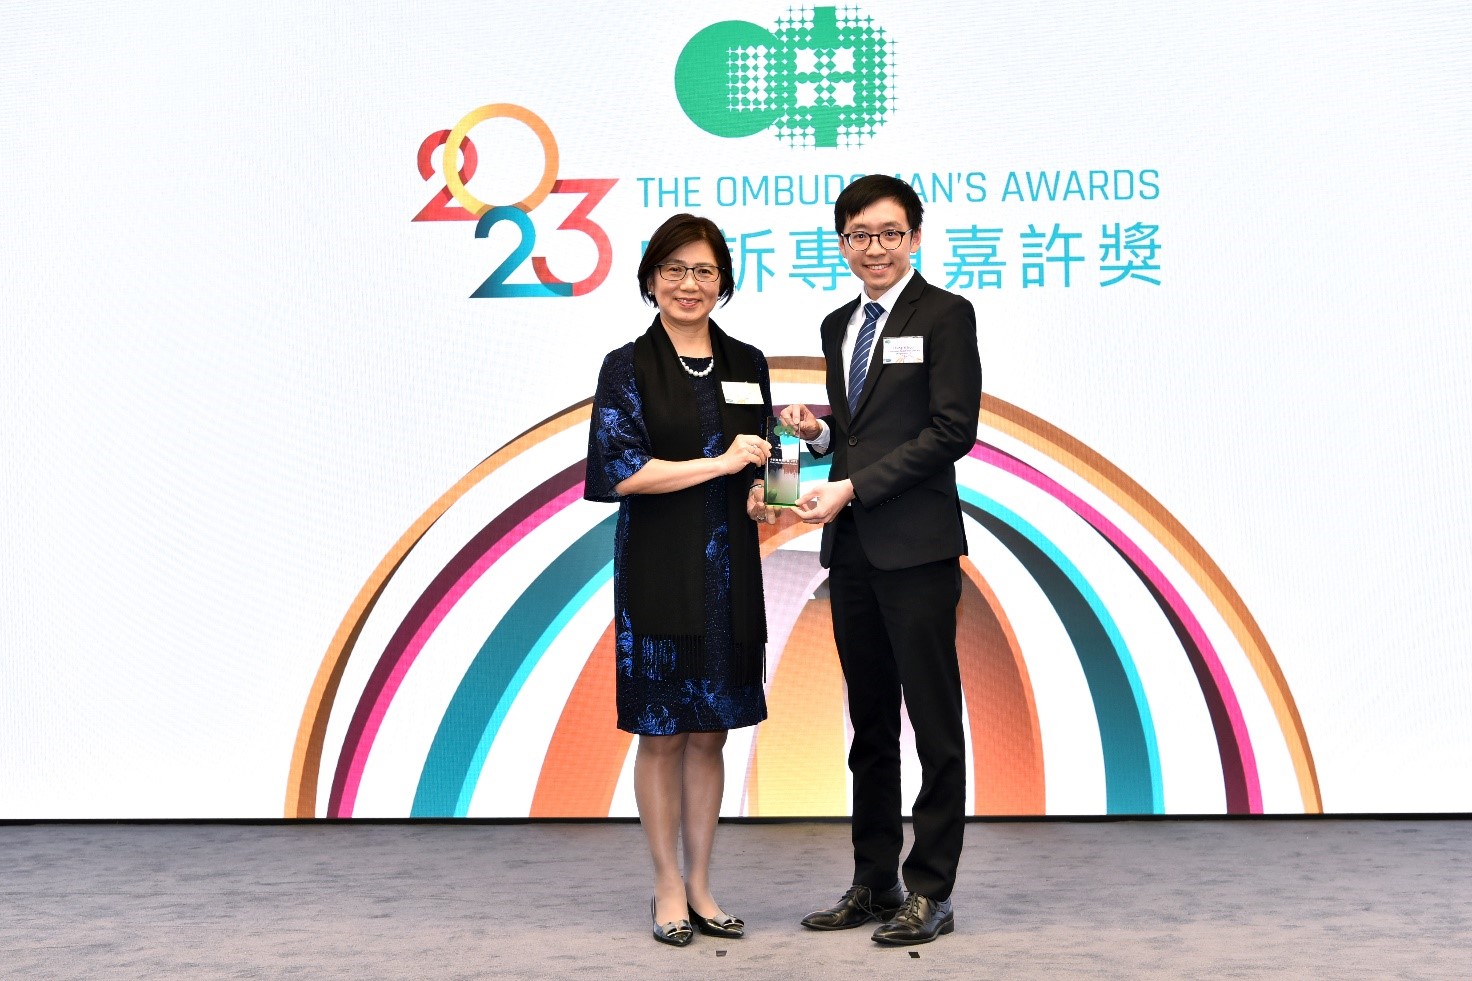 Mr Michael Leung, Companies Registration Officer I (right), received the Award at the Award Presentation Ceremony.